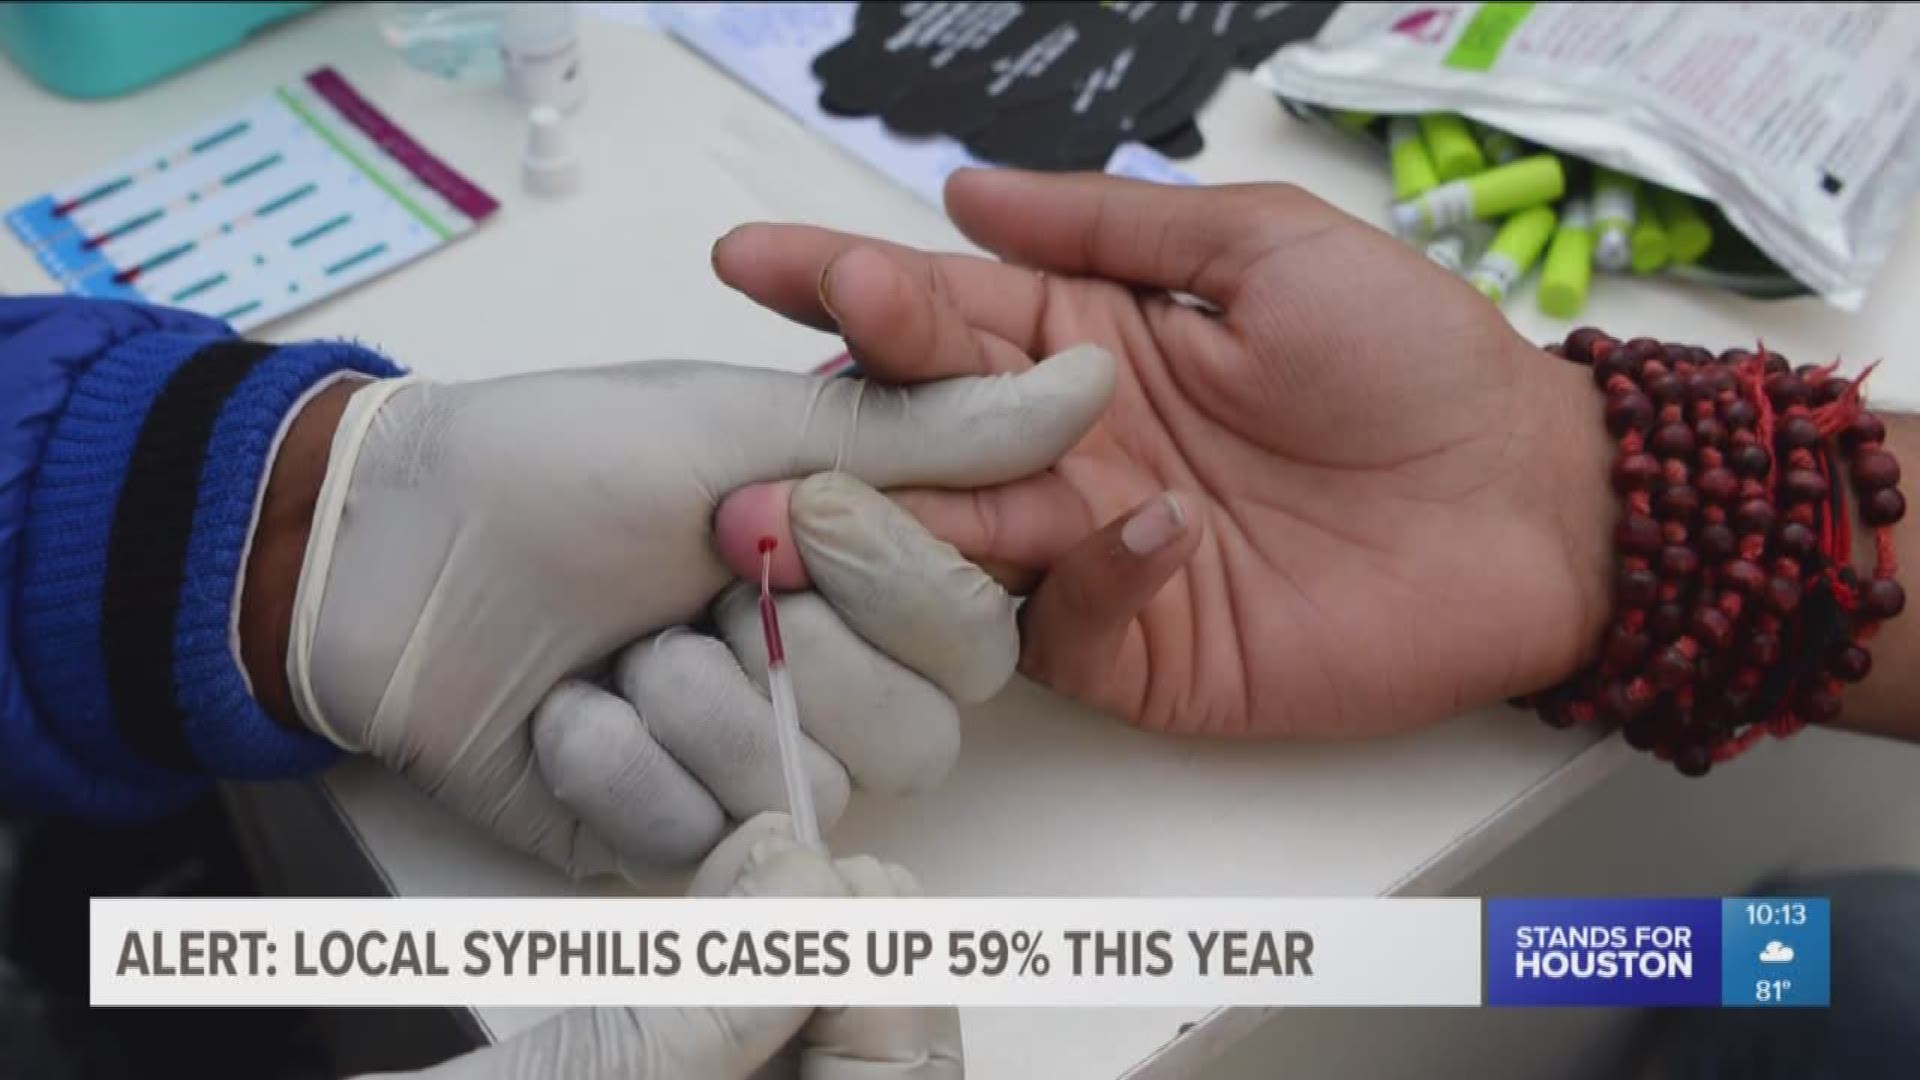 Health department officials are monitoring a disturbing trend in Houston. New cases of the STD syphilis are way up this year, according to the Houston Health Department.